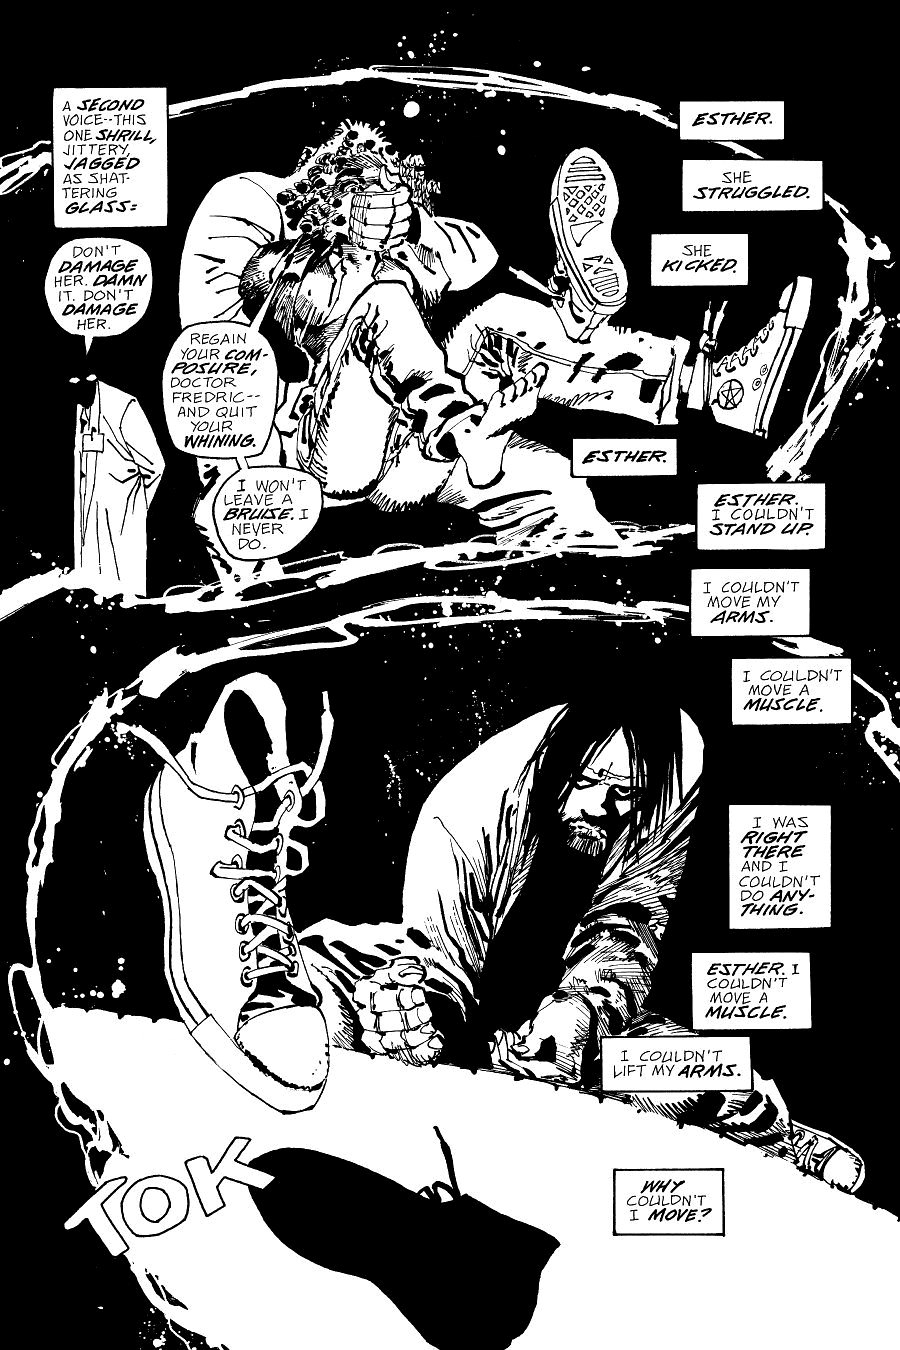 page 42 of sin city 7 hell and back